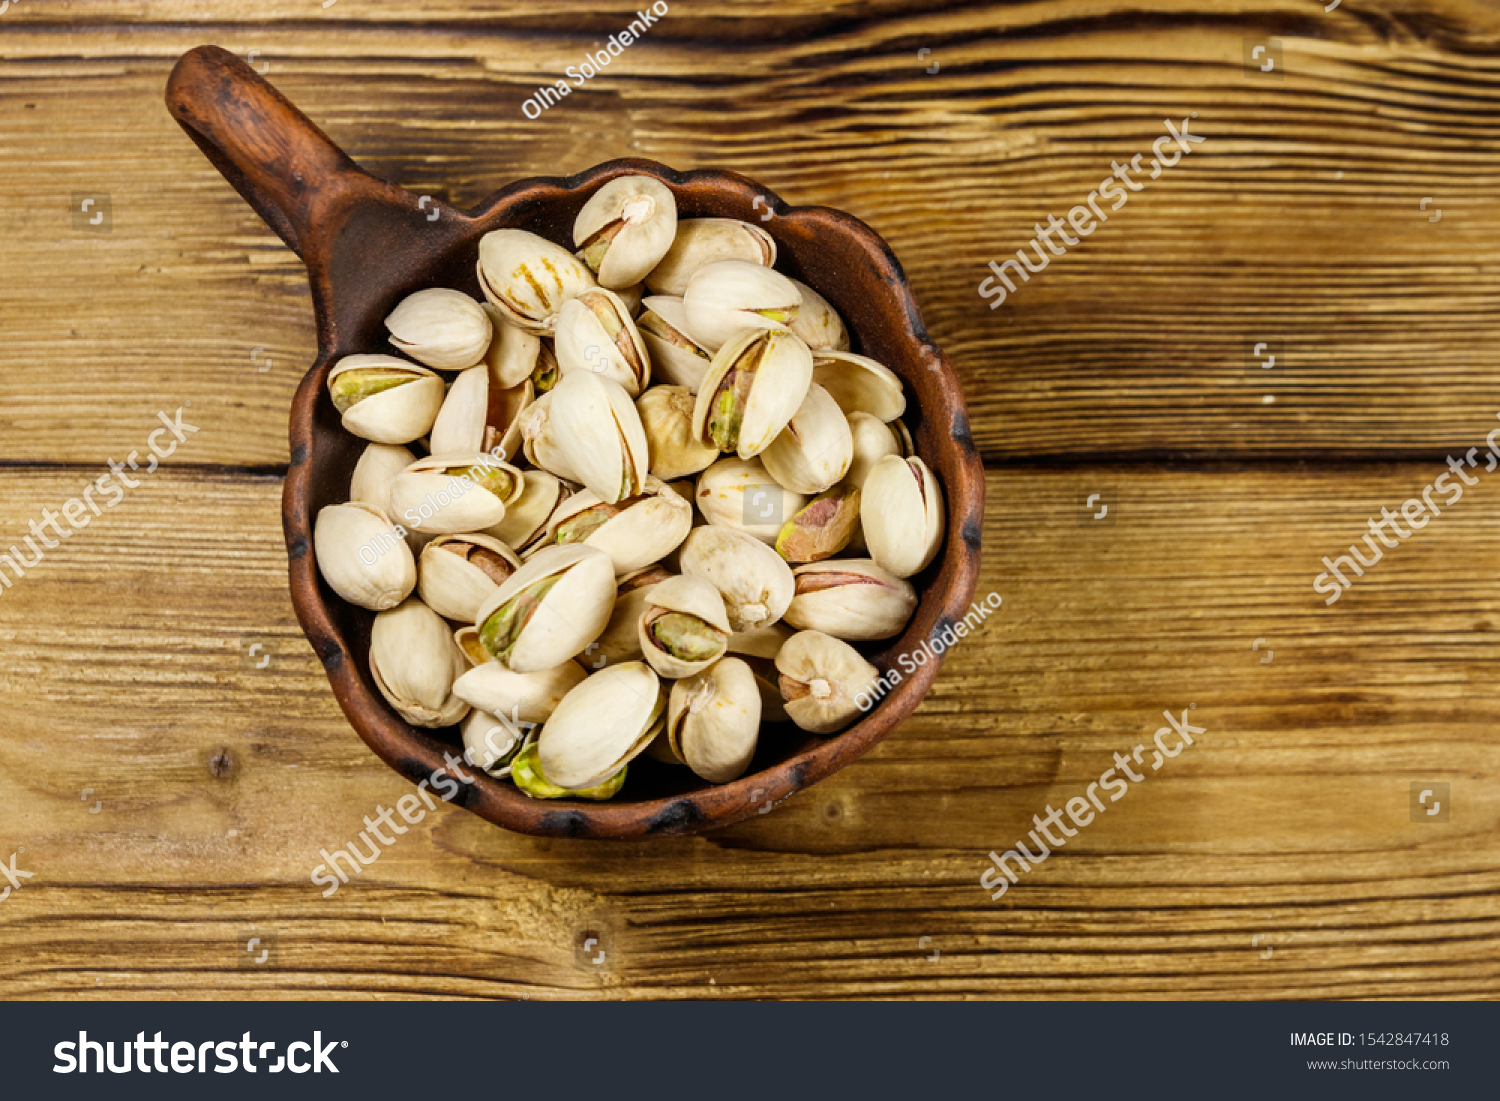 Pistachio nuts in ceramic bowl on a wooden table. Top view #1542847418